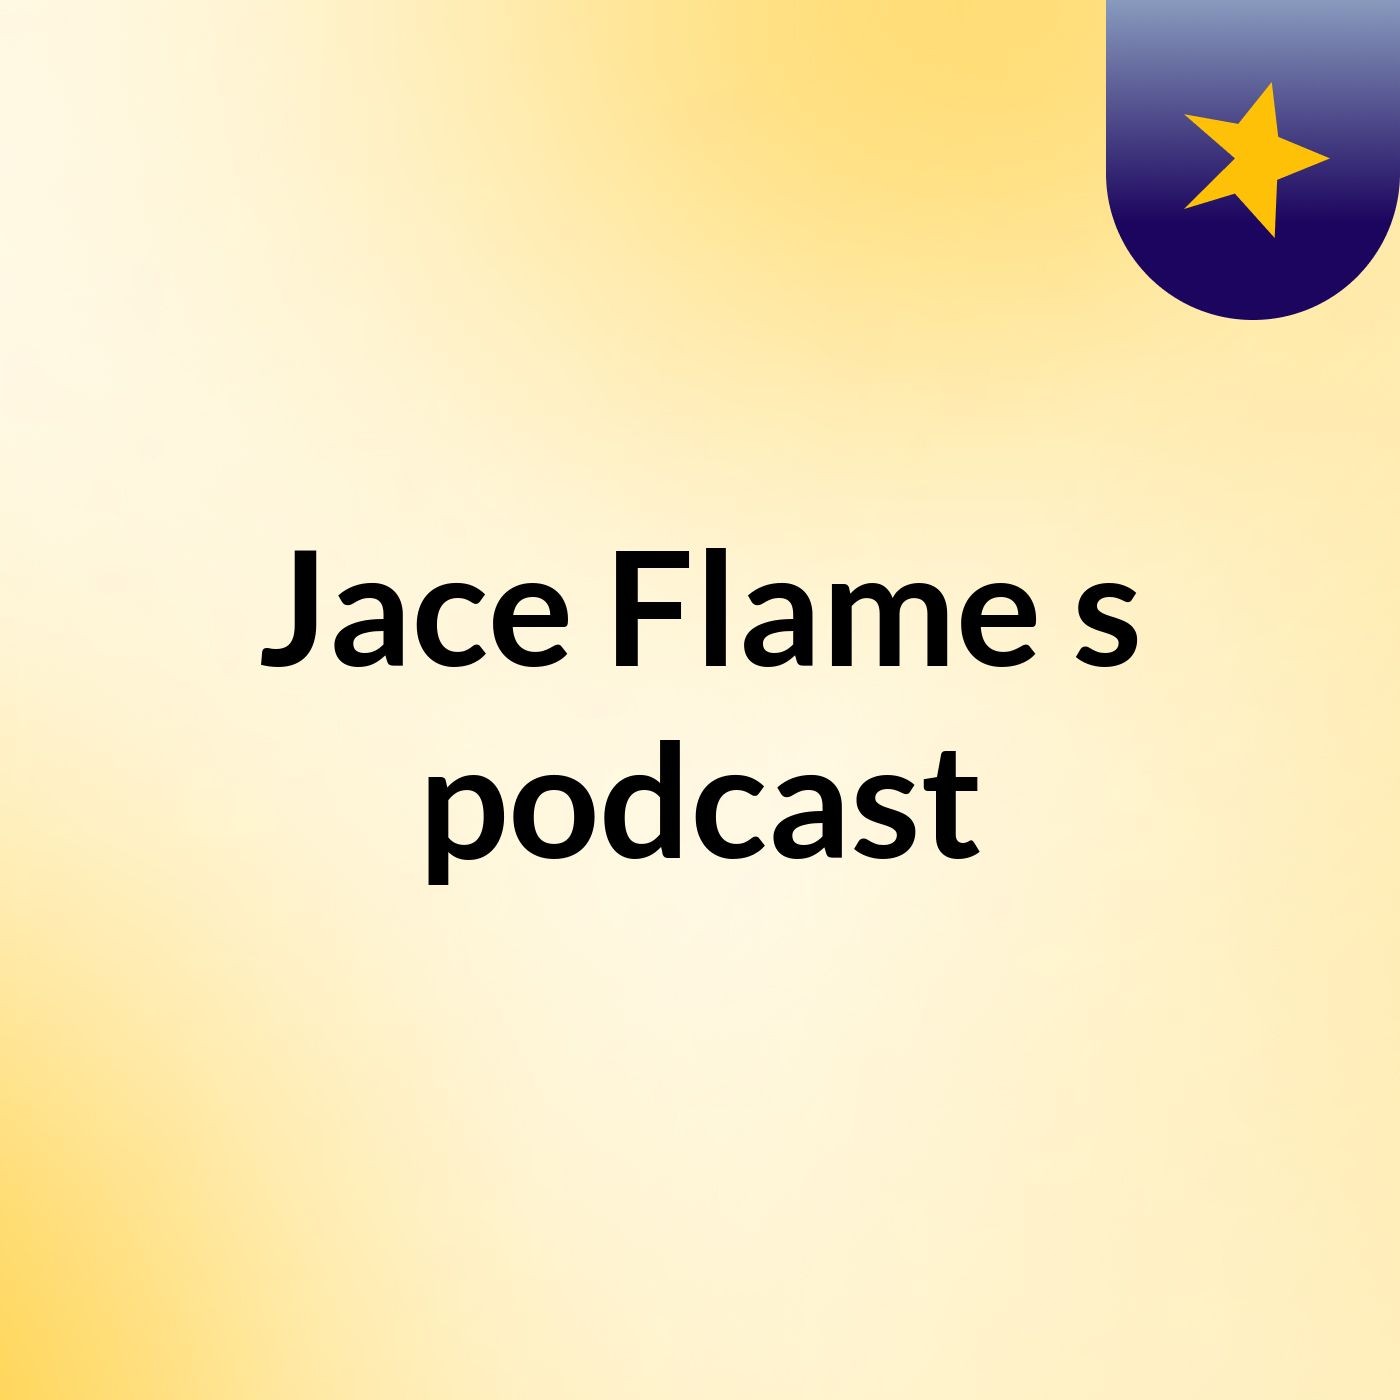 Jace Flame's podcast